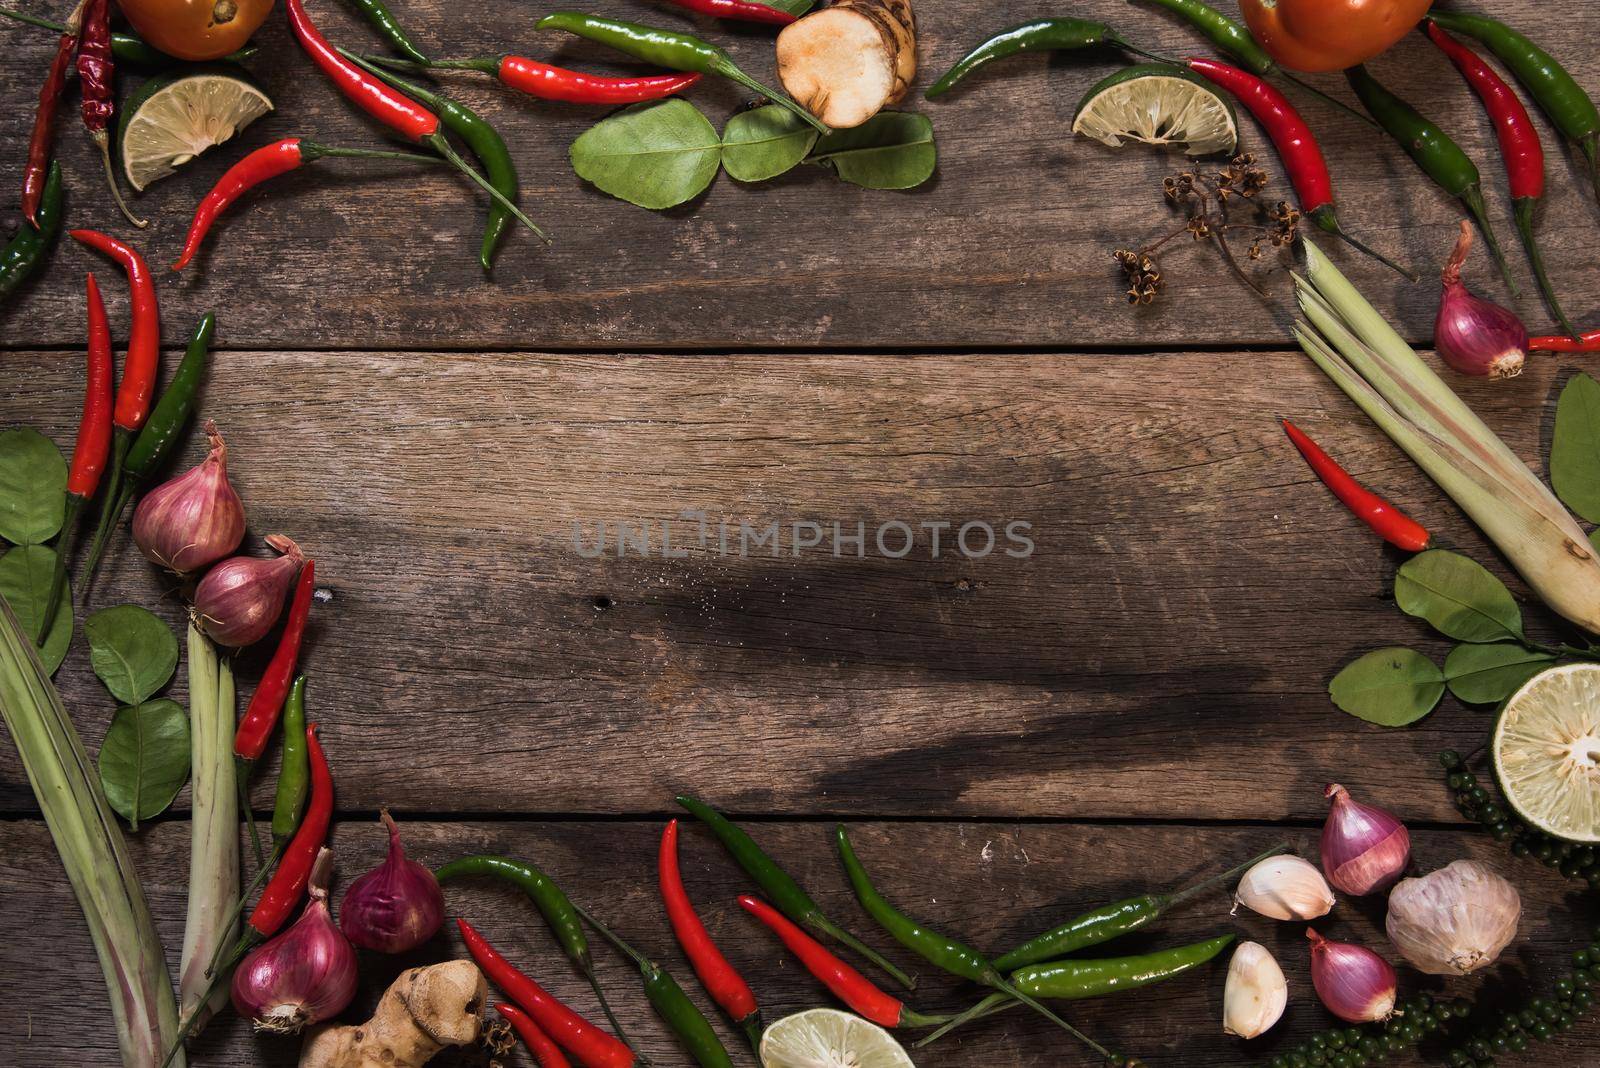 spices with ingredients on wood background. asian food, healthy or cooking concept. by Wmpix